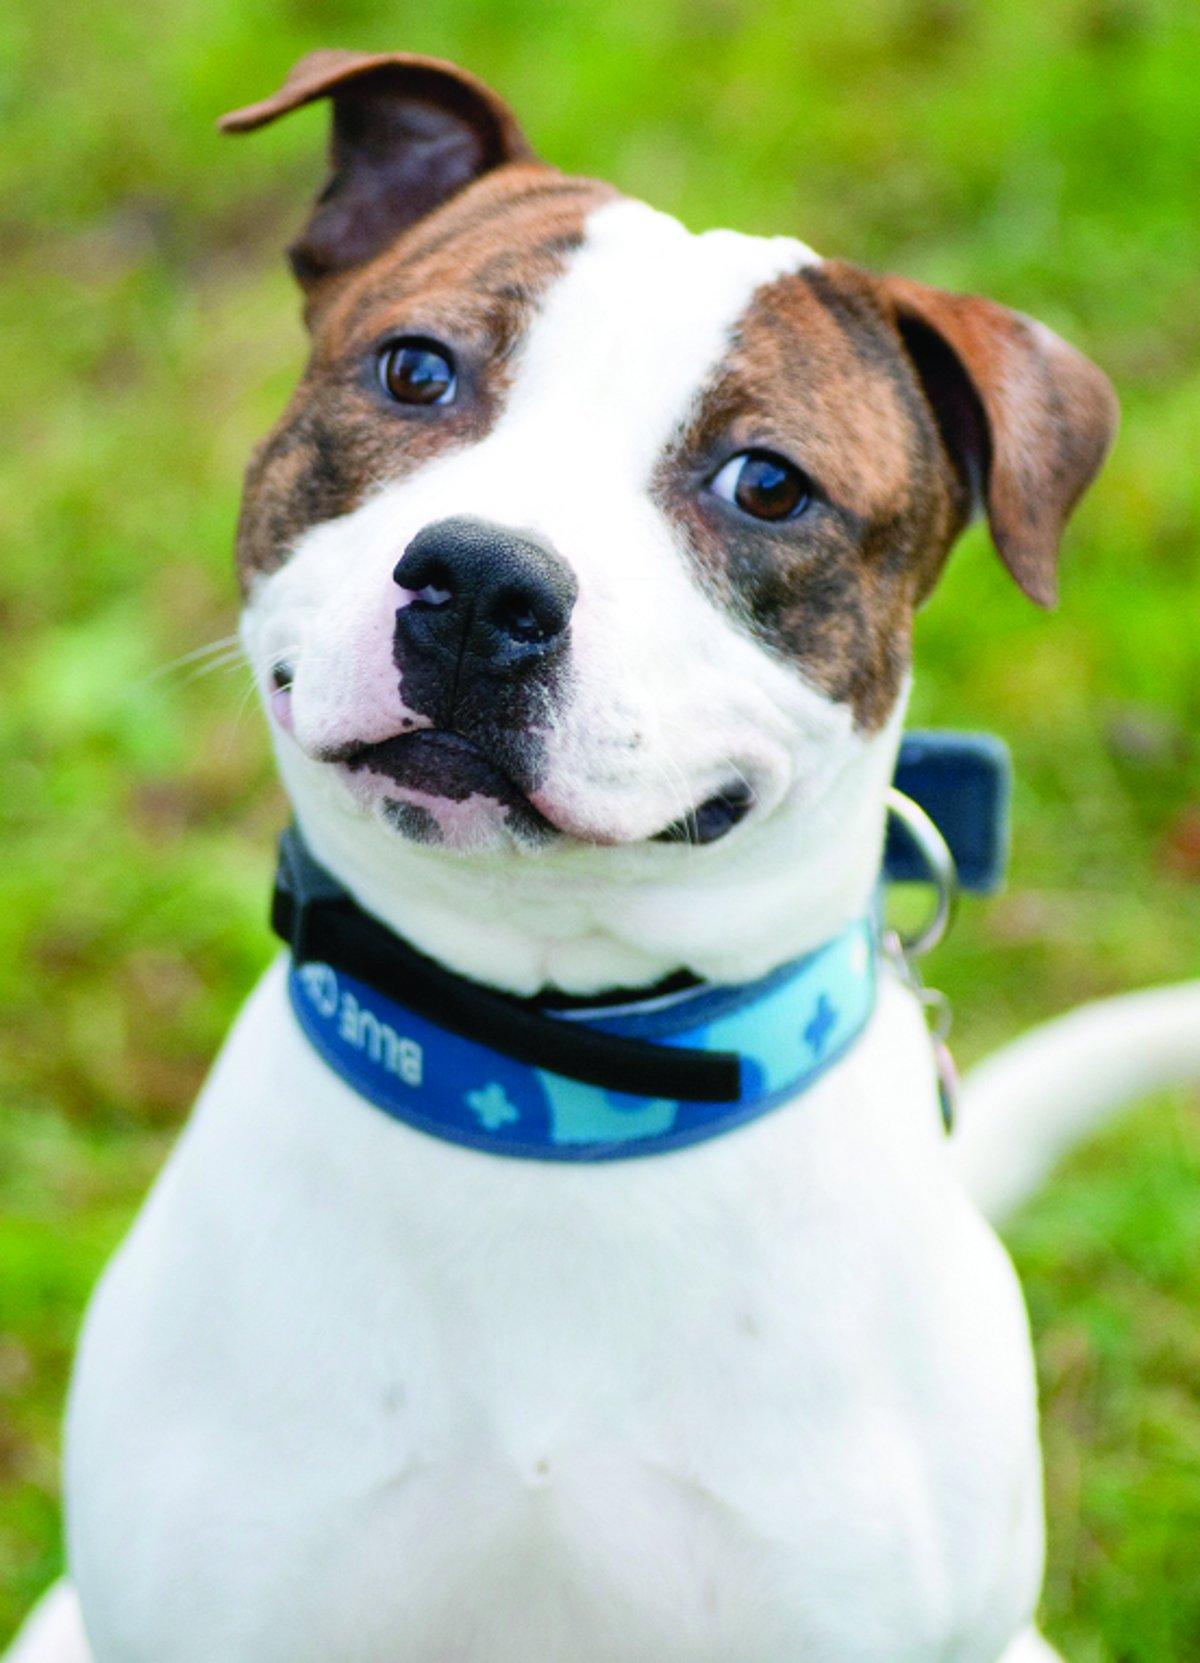 Can you give a dog a new life?
“Calvin is an 11-month-old Staffordshire bull terrier. He arrived at Blue Cross as a stray. He is typical of his breed and just loves the company of people and having cuddles, so would need owners who are around for most 